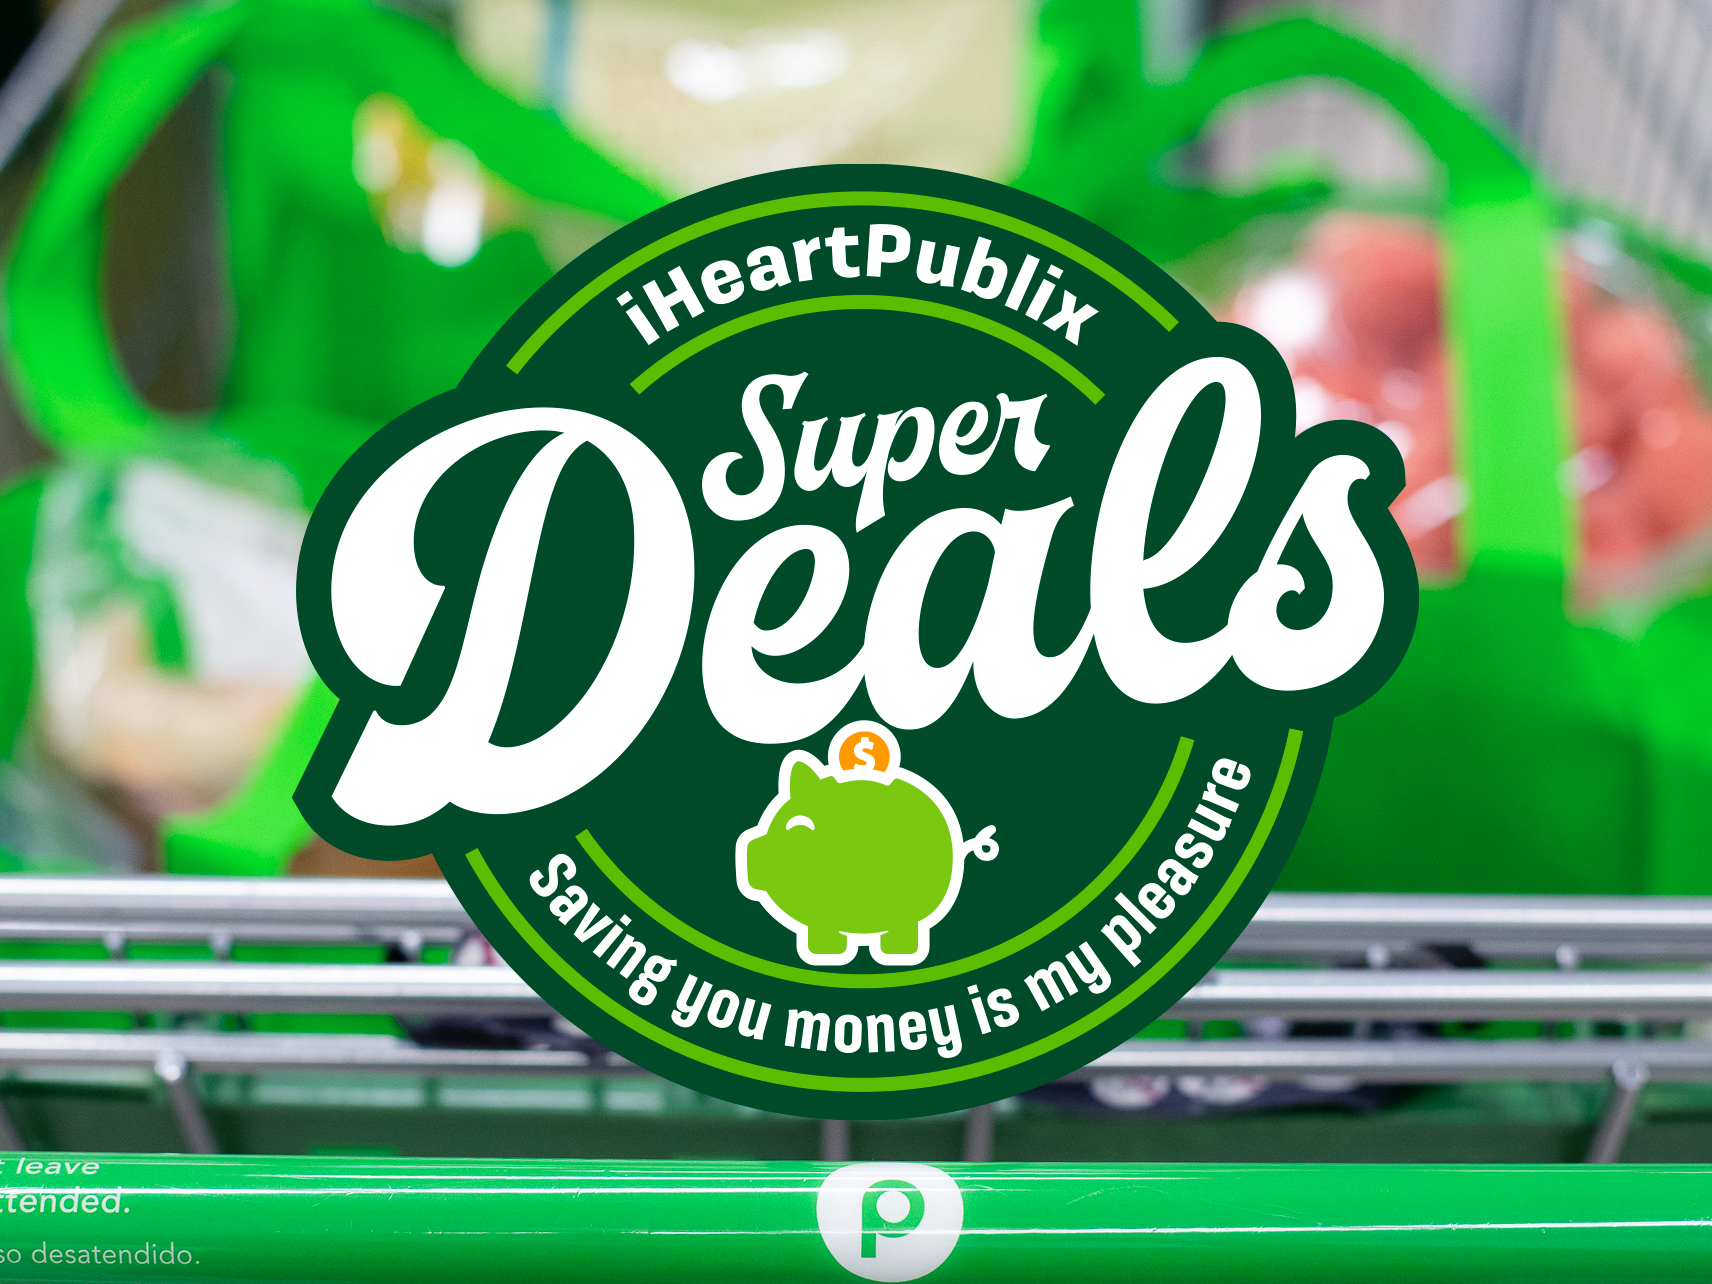 Publix Super Deals Week Of 8/24 to 8/30 (8/23 to 8/29 For Some)